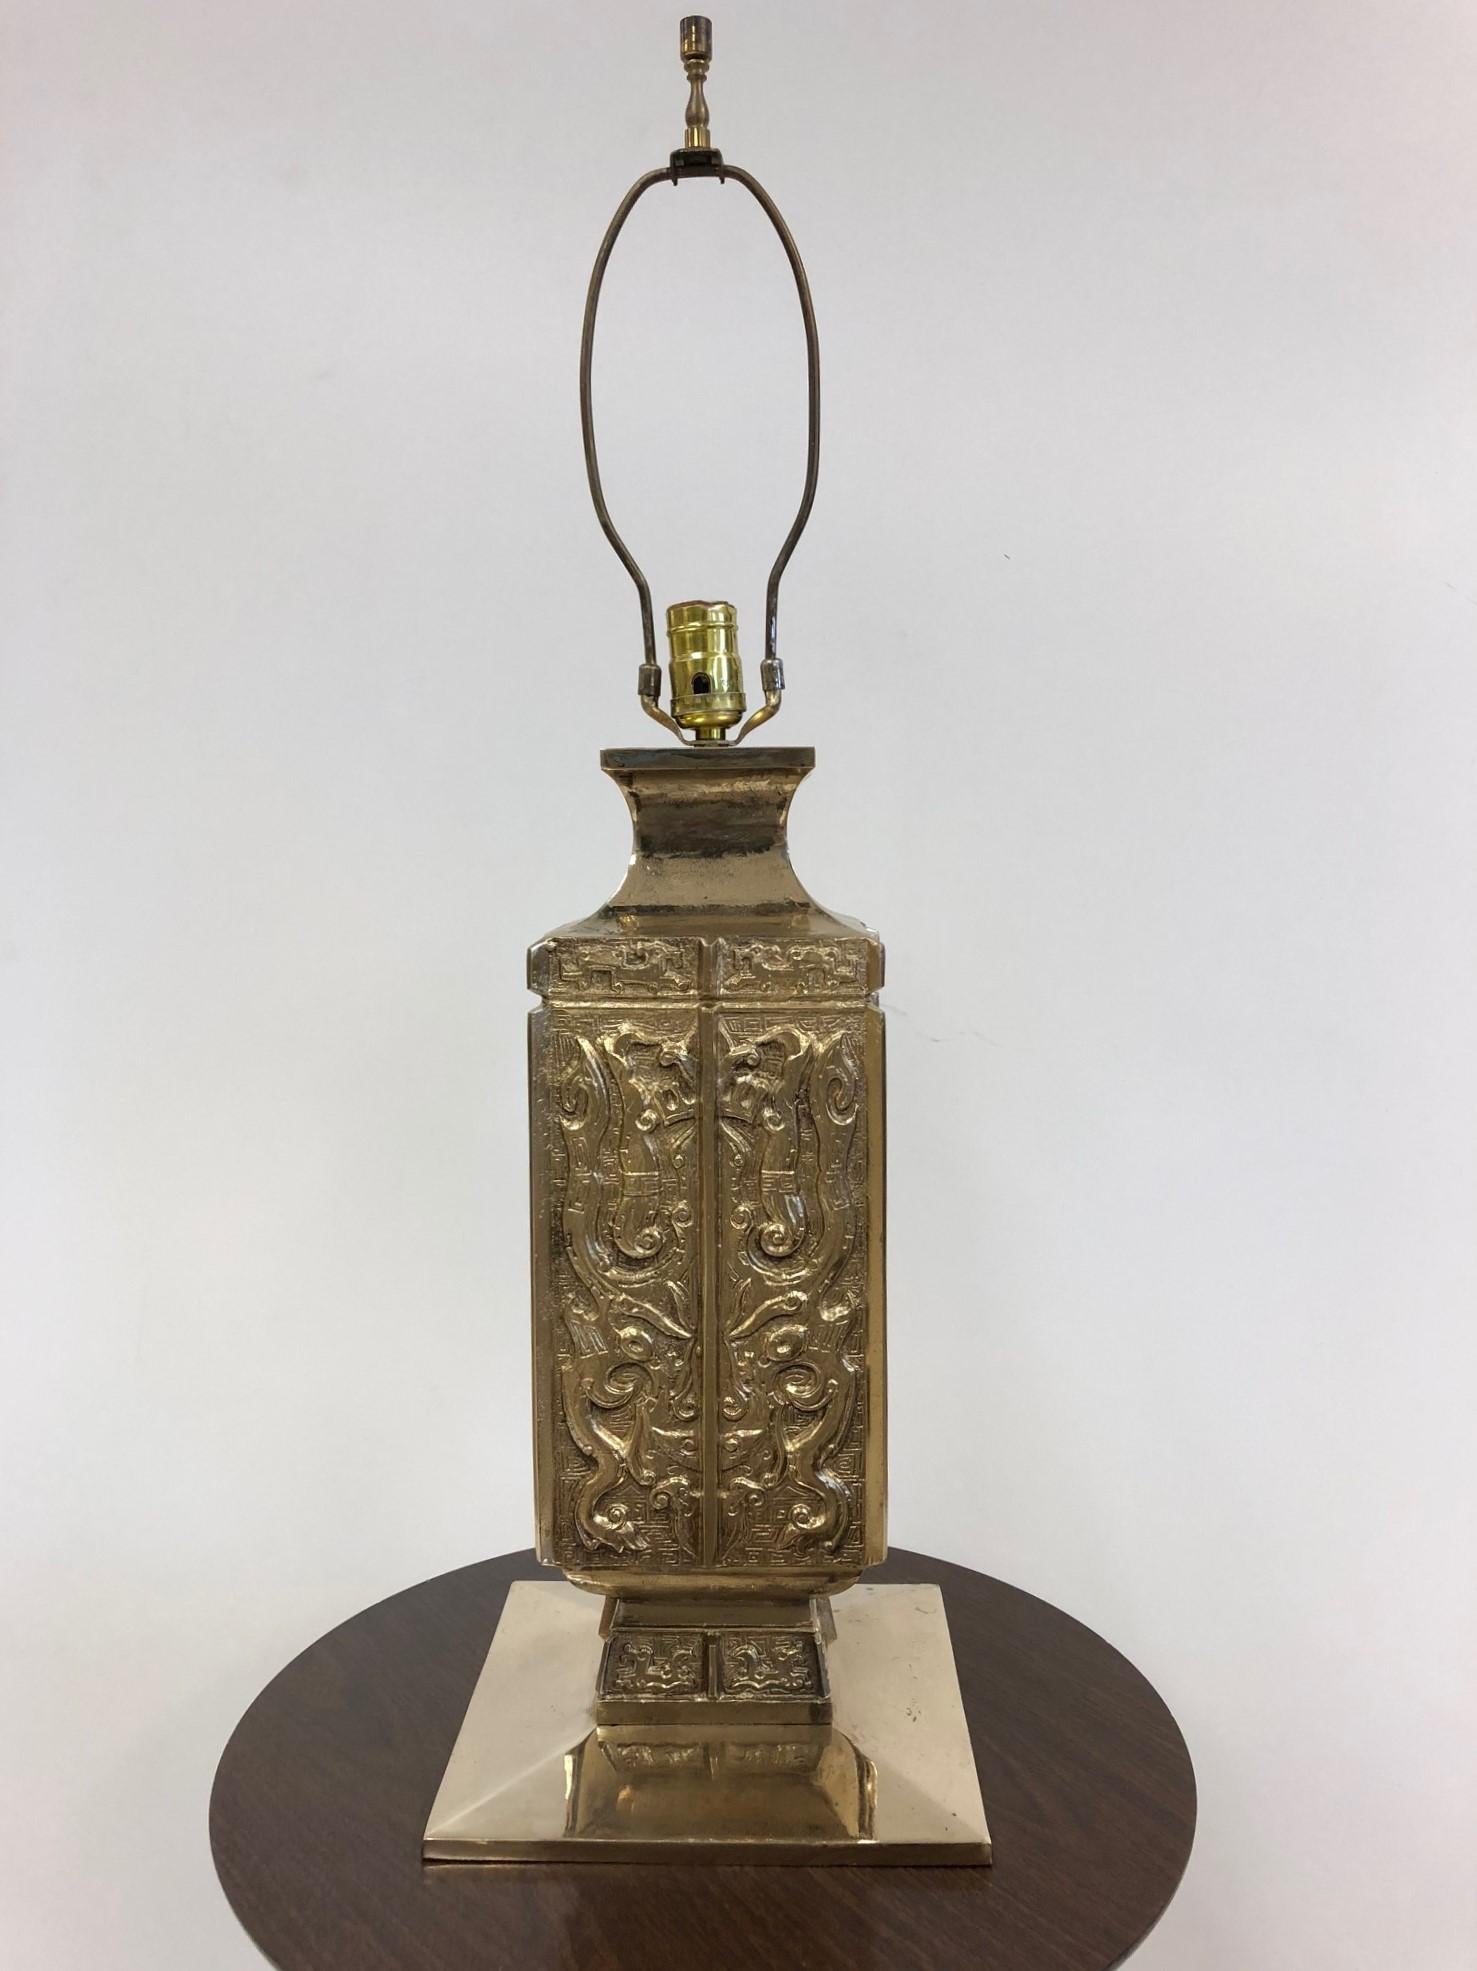 Exquisite pair of bronze Asian lamps. These lamps are well designed, heavy and would look extra special in an Asian inspired room. James Mont style.
Base measures: 9.25